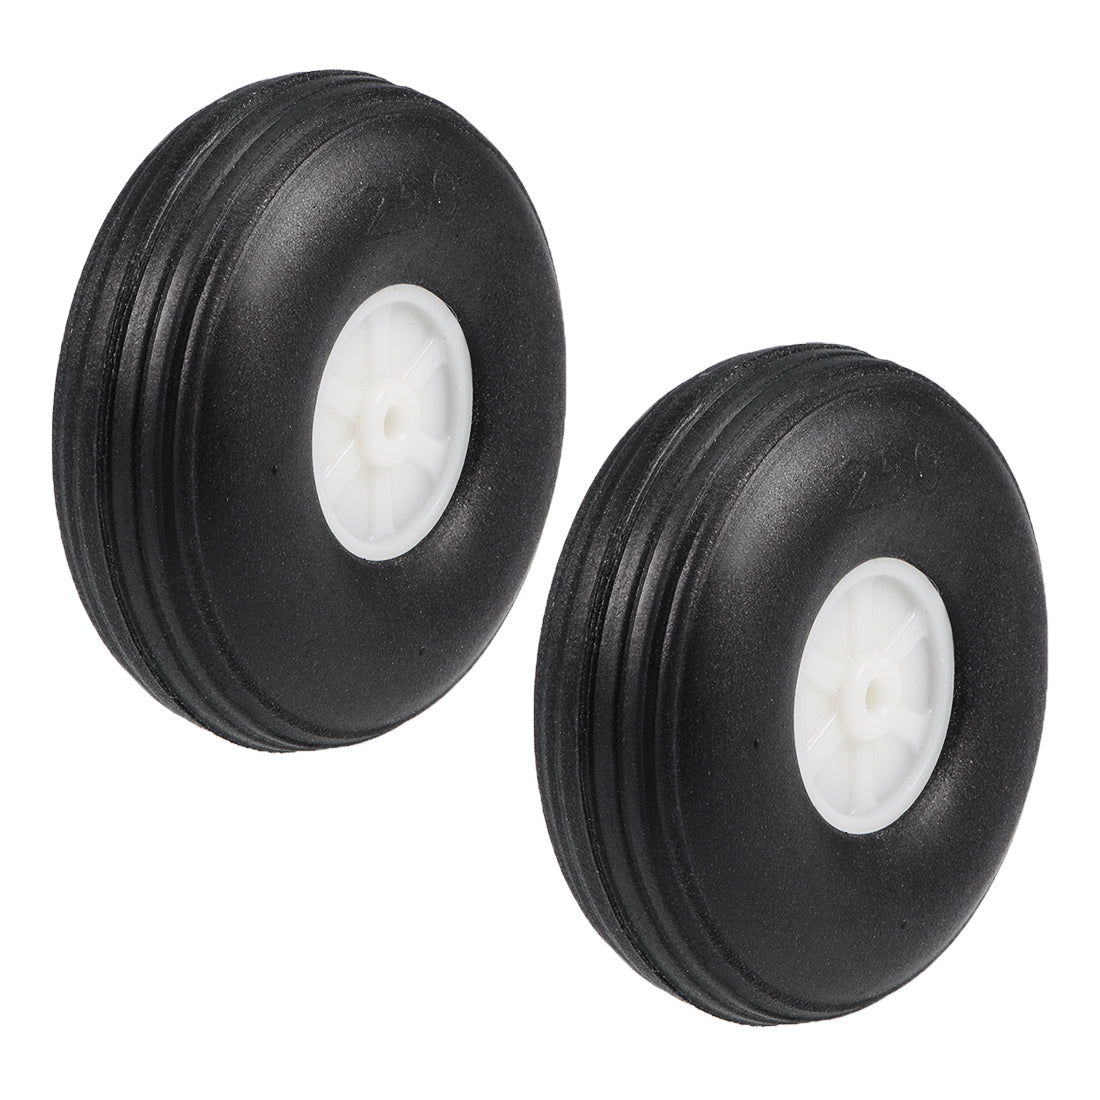 uxcell Uxcell Tire and Wheel Sets for RC Airplane,PU Sponge Tire with Plastic Hub,2.5" 2pcs